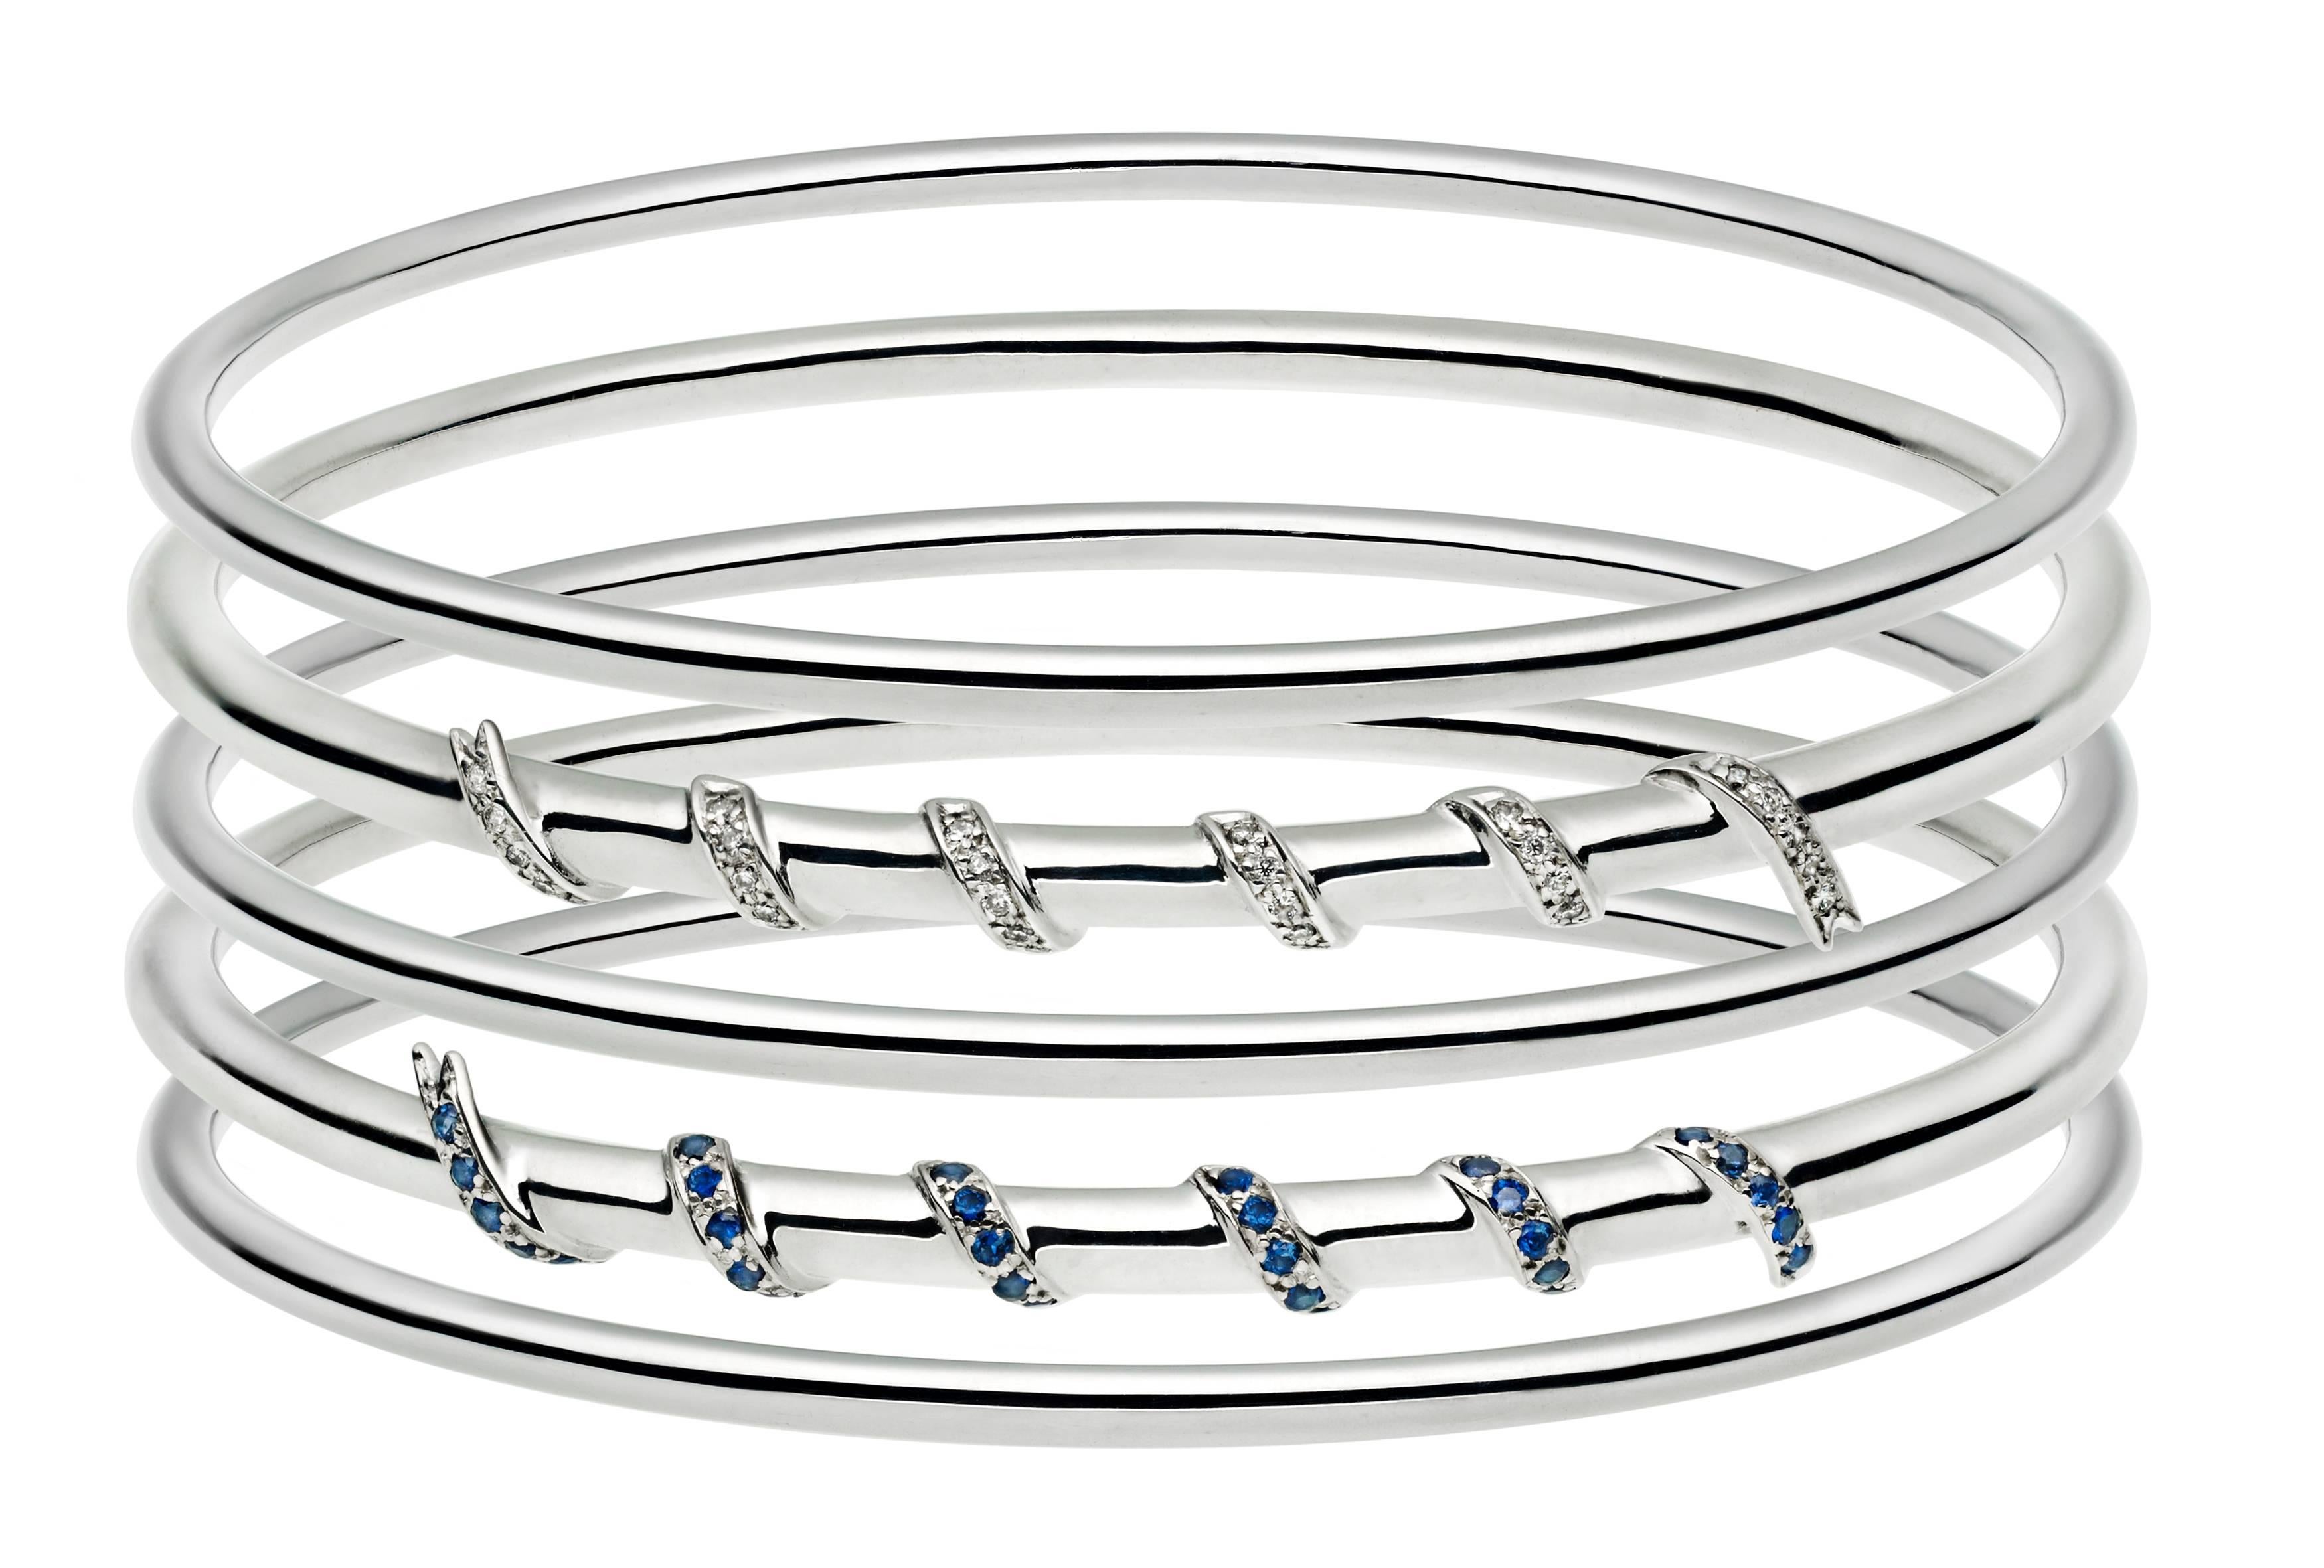 The bangle is handcrafted from solid 18ct white gold and is pave set with 0.35ct of sapphires which are hand set in the ribbon. This delicately wraps around the top section of the bangle. 
The bangle can be sized to fit any wrist size. 

Internal